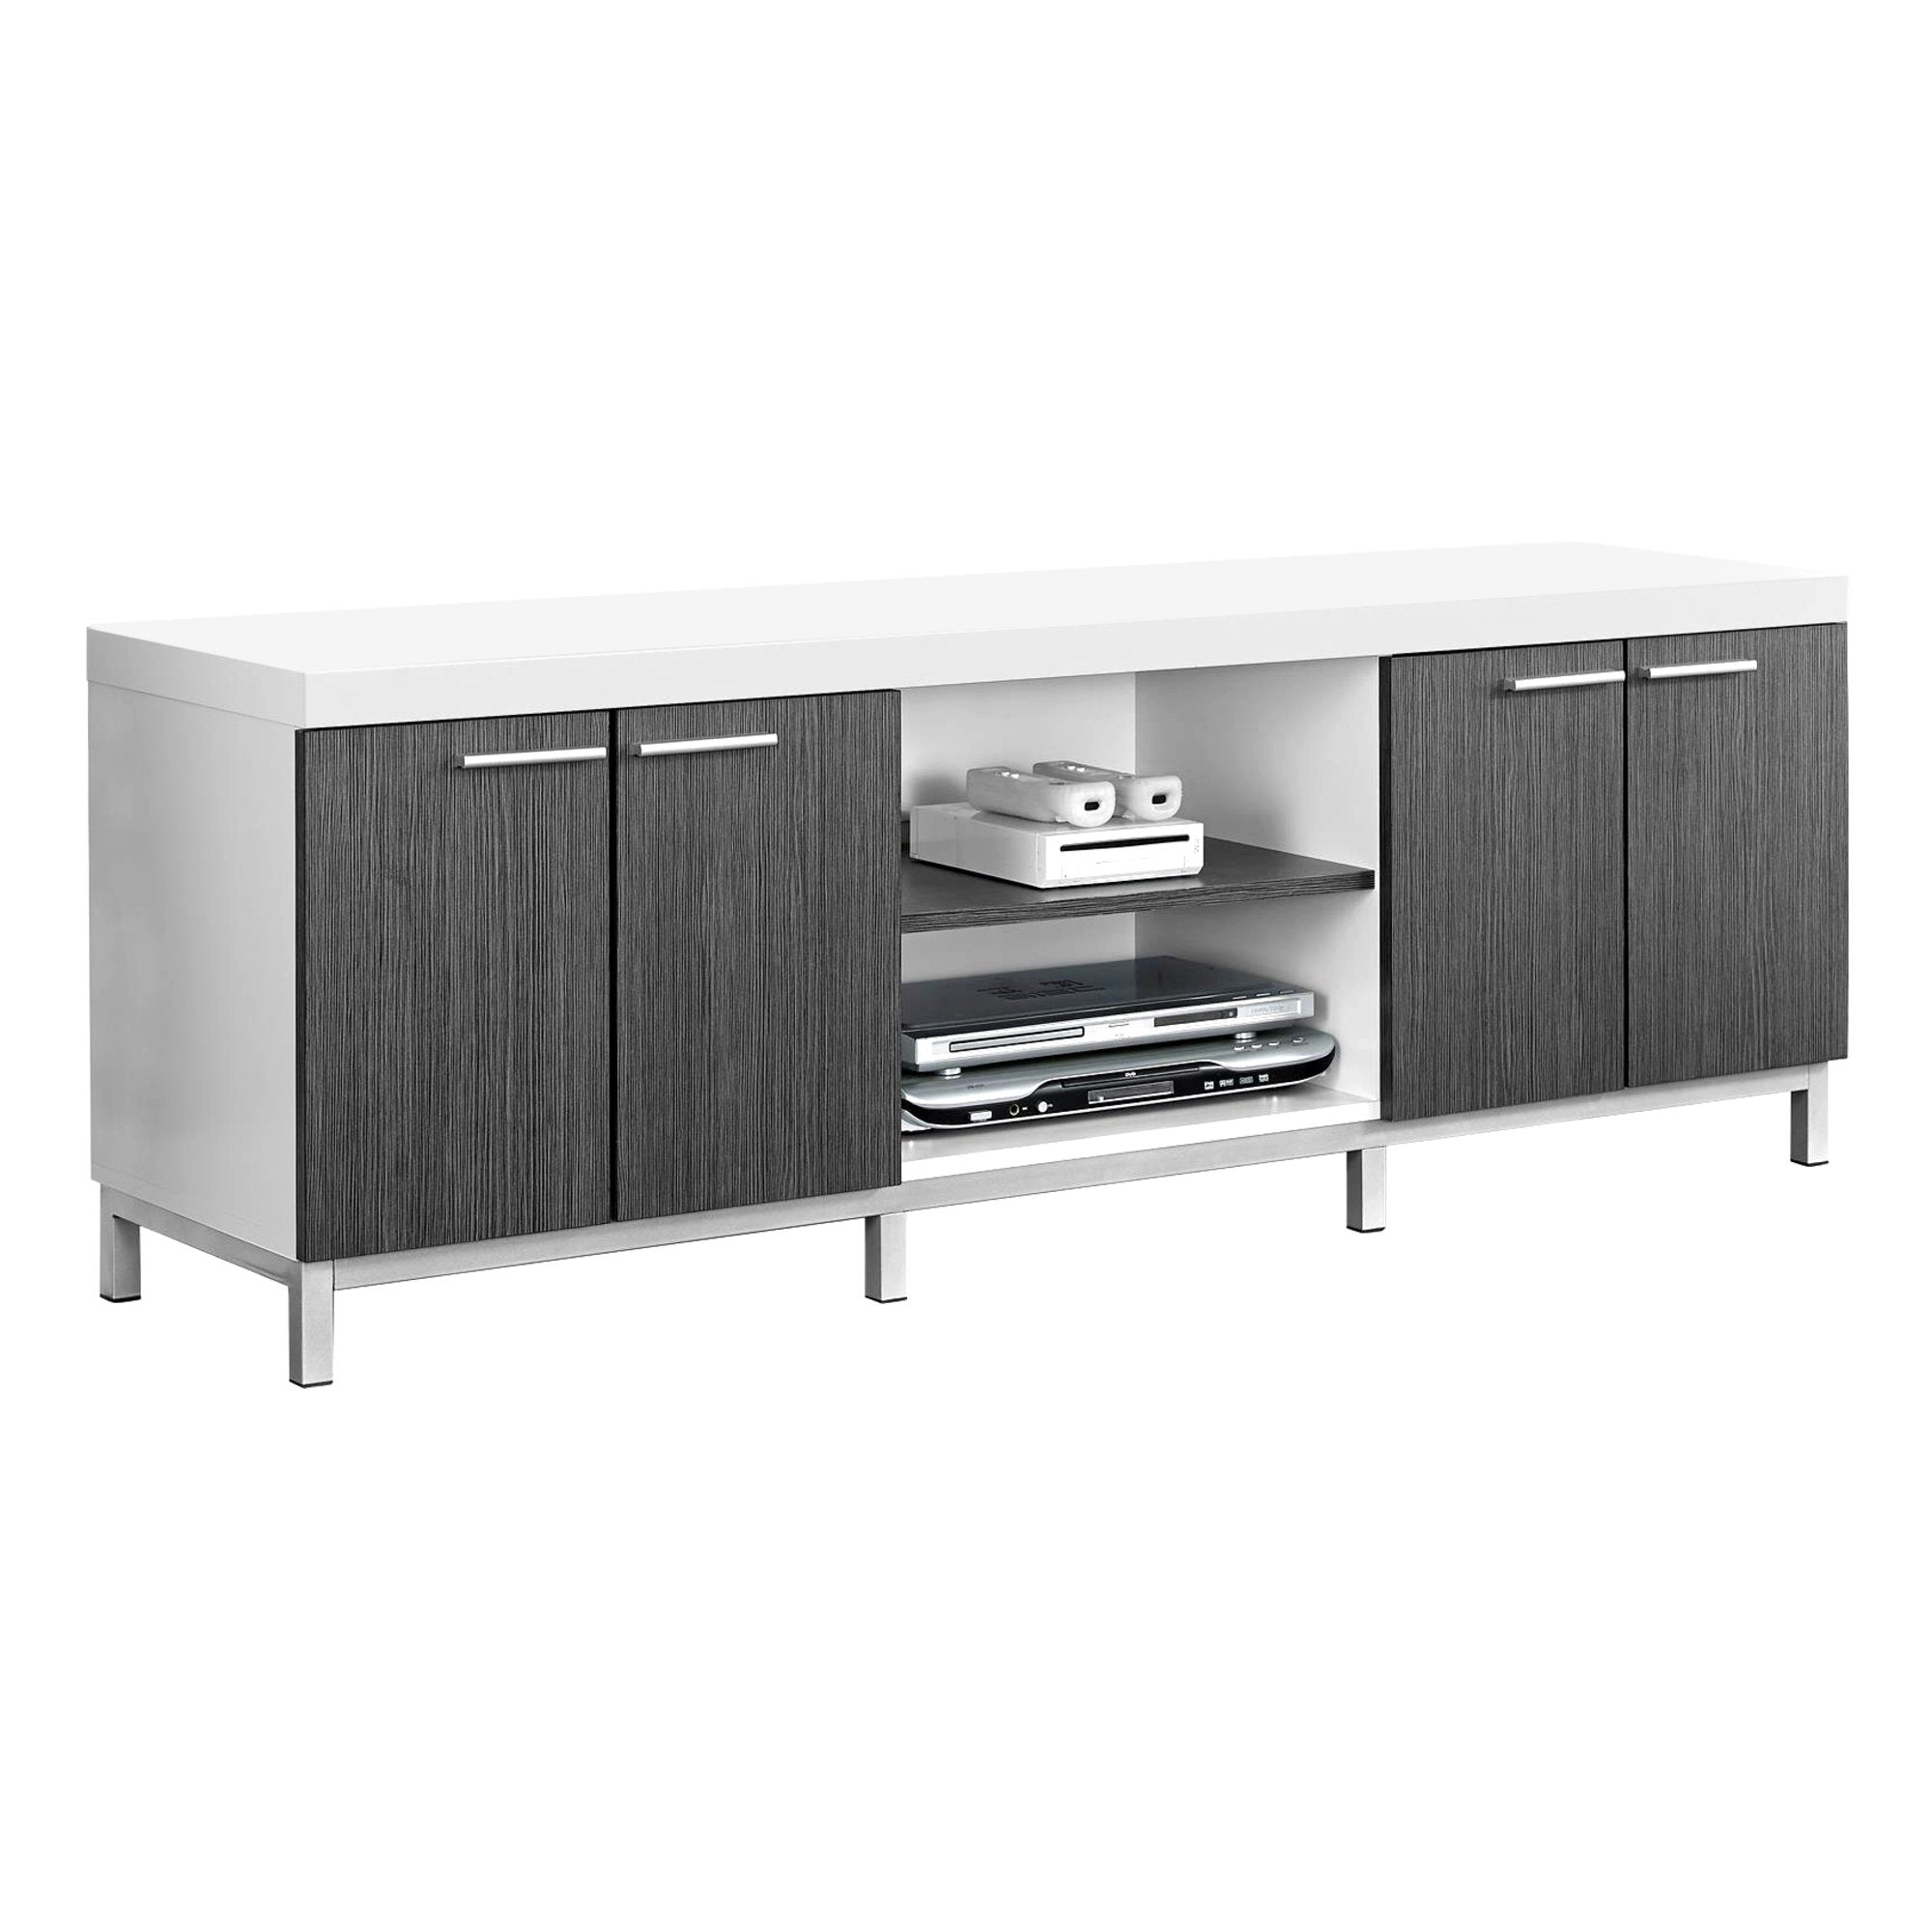 MN-732591    Tv Stand, 60 Inch, Console, Media Entertainment Center, Storage Cabinet, Living Room, Bedroom, Laminate, White, Contemporary, Modern